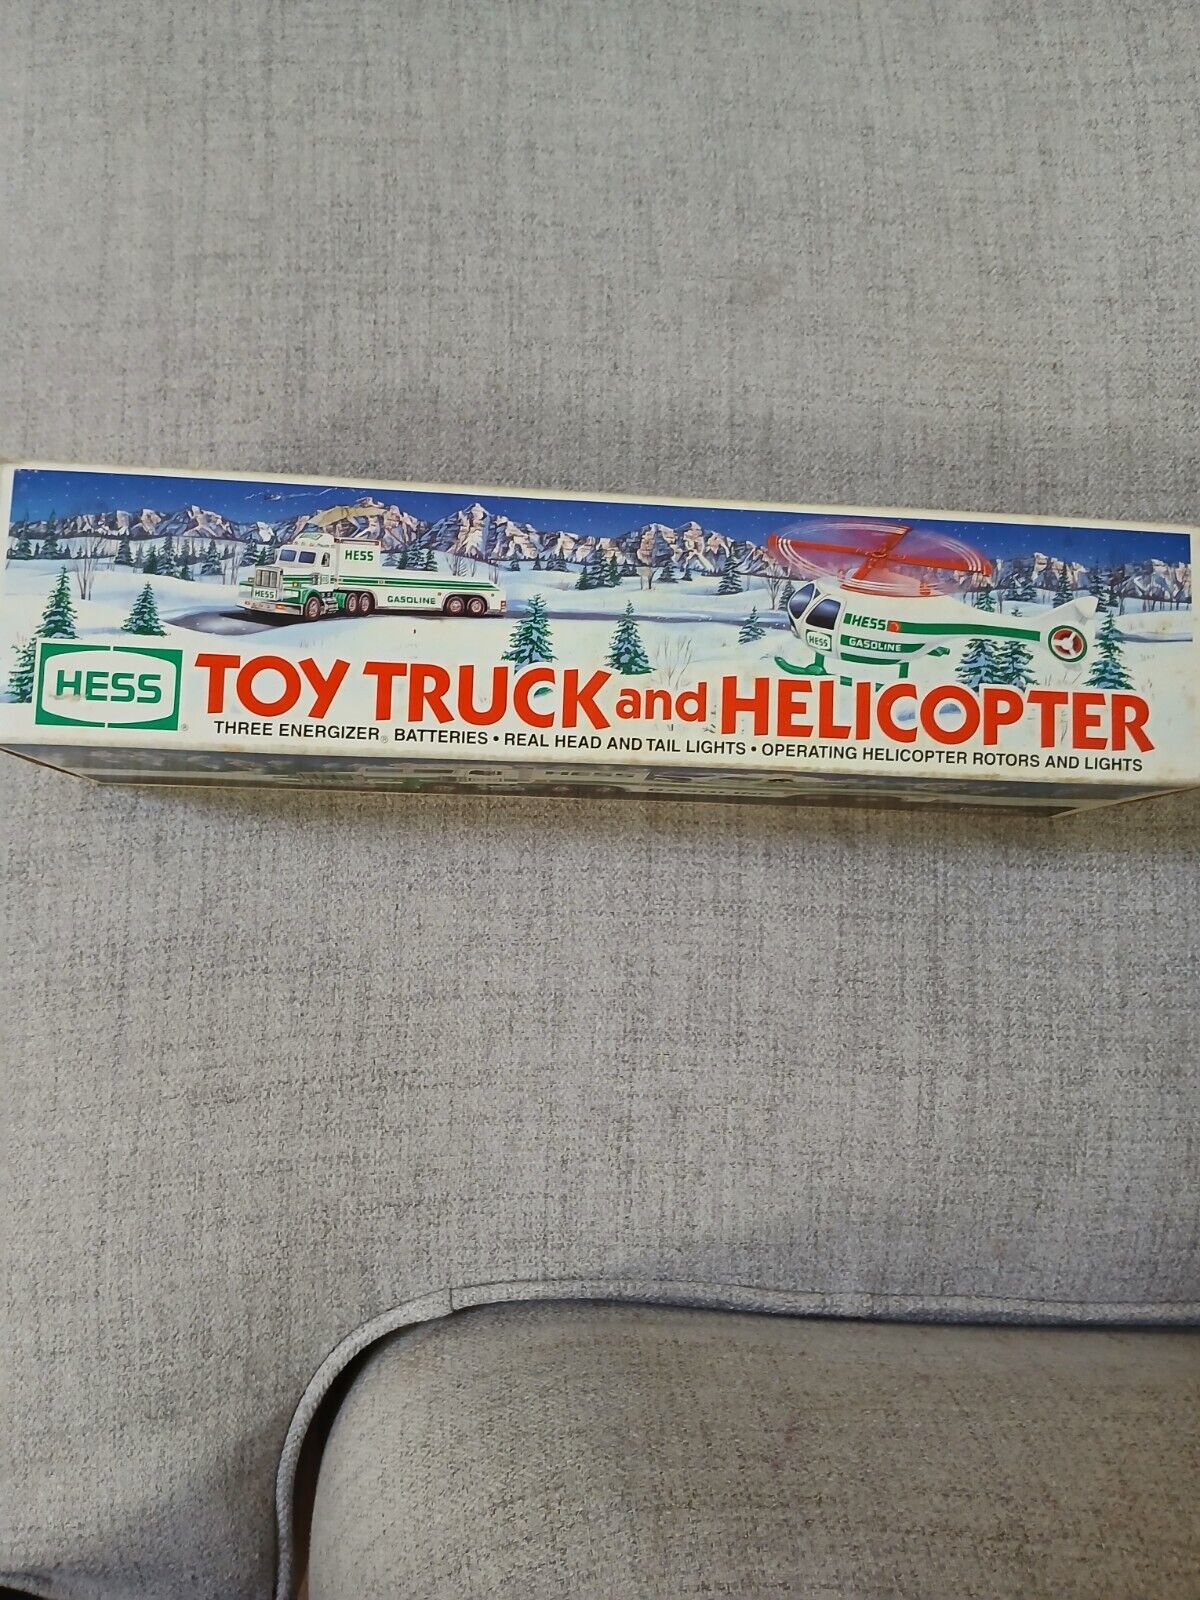 Vintage 1995 Hess Toy Truck and Helicopter - New In Original Box